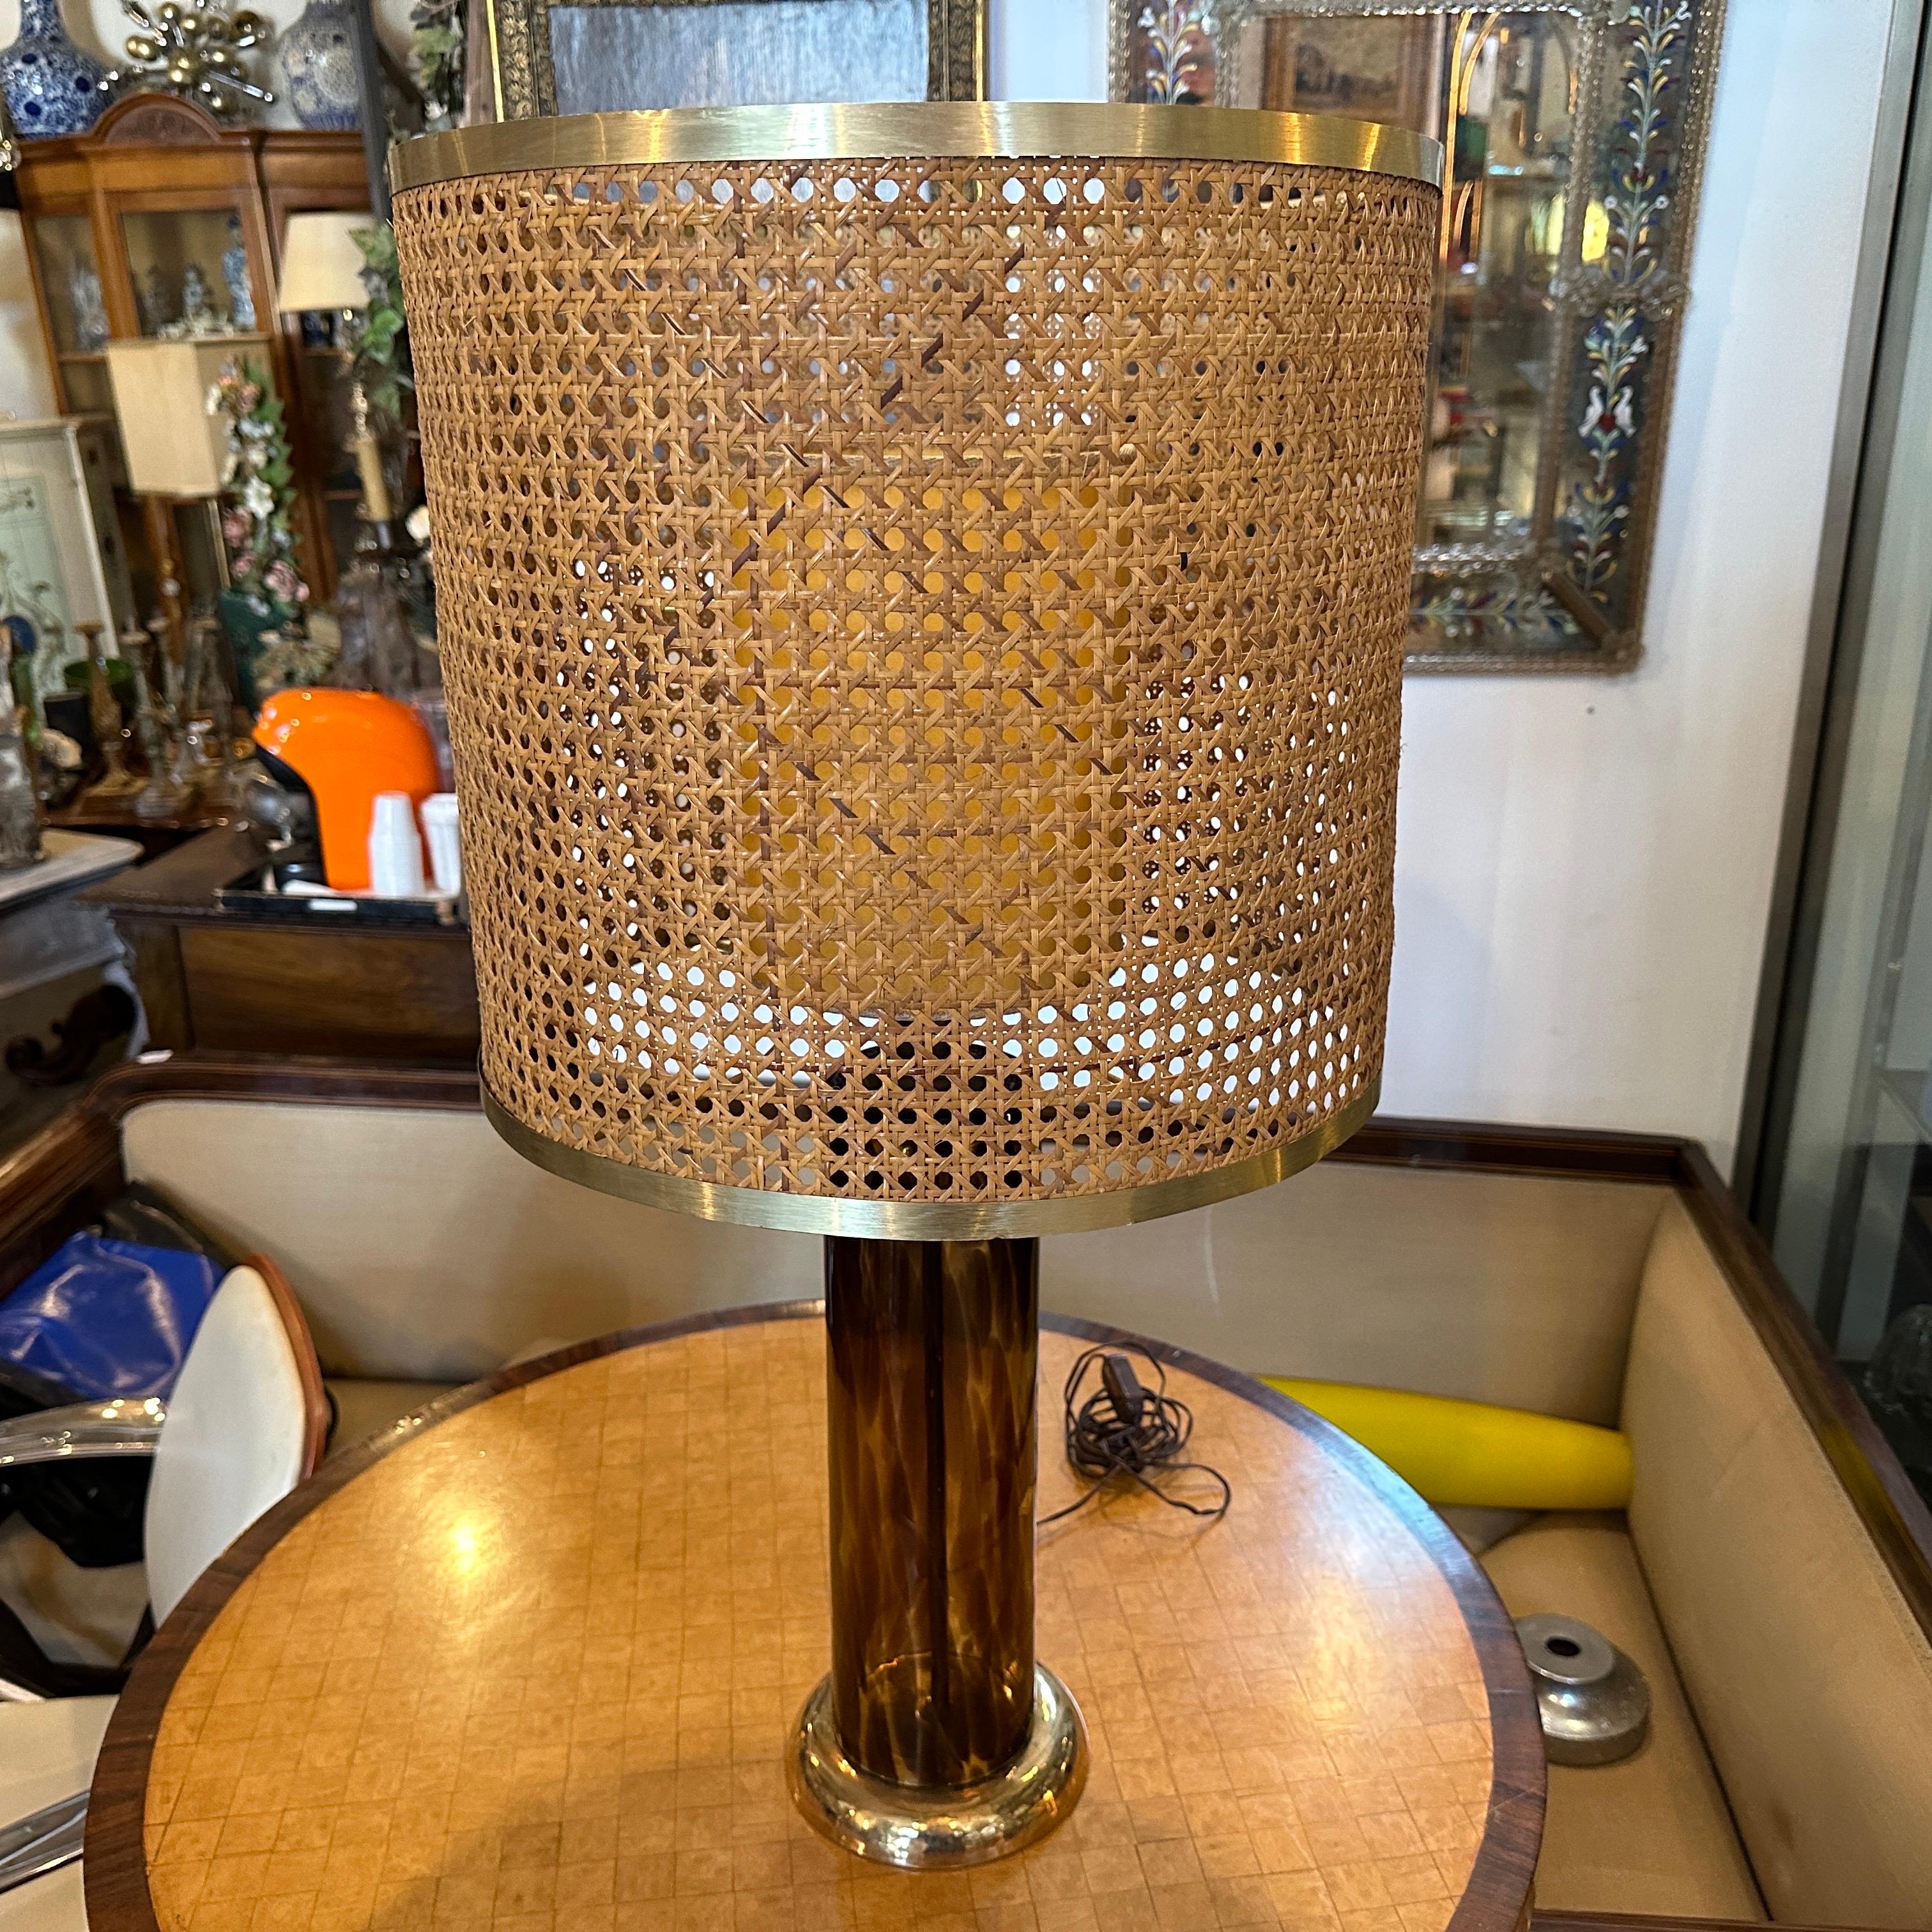 A table lamp made by brass and glass fake tortoiseshell effect with the original brass and Vienna straw lampshade in very good conditions. It has been designed and manufactured in Italy in the Seventies using materials and style very similar to